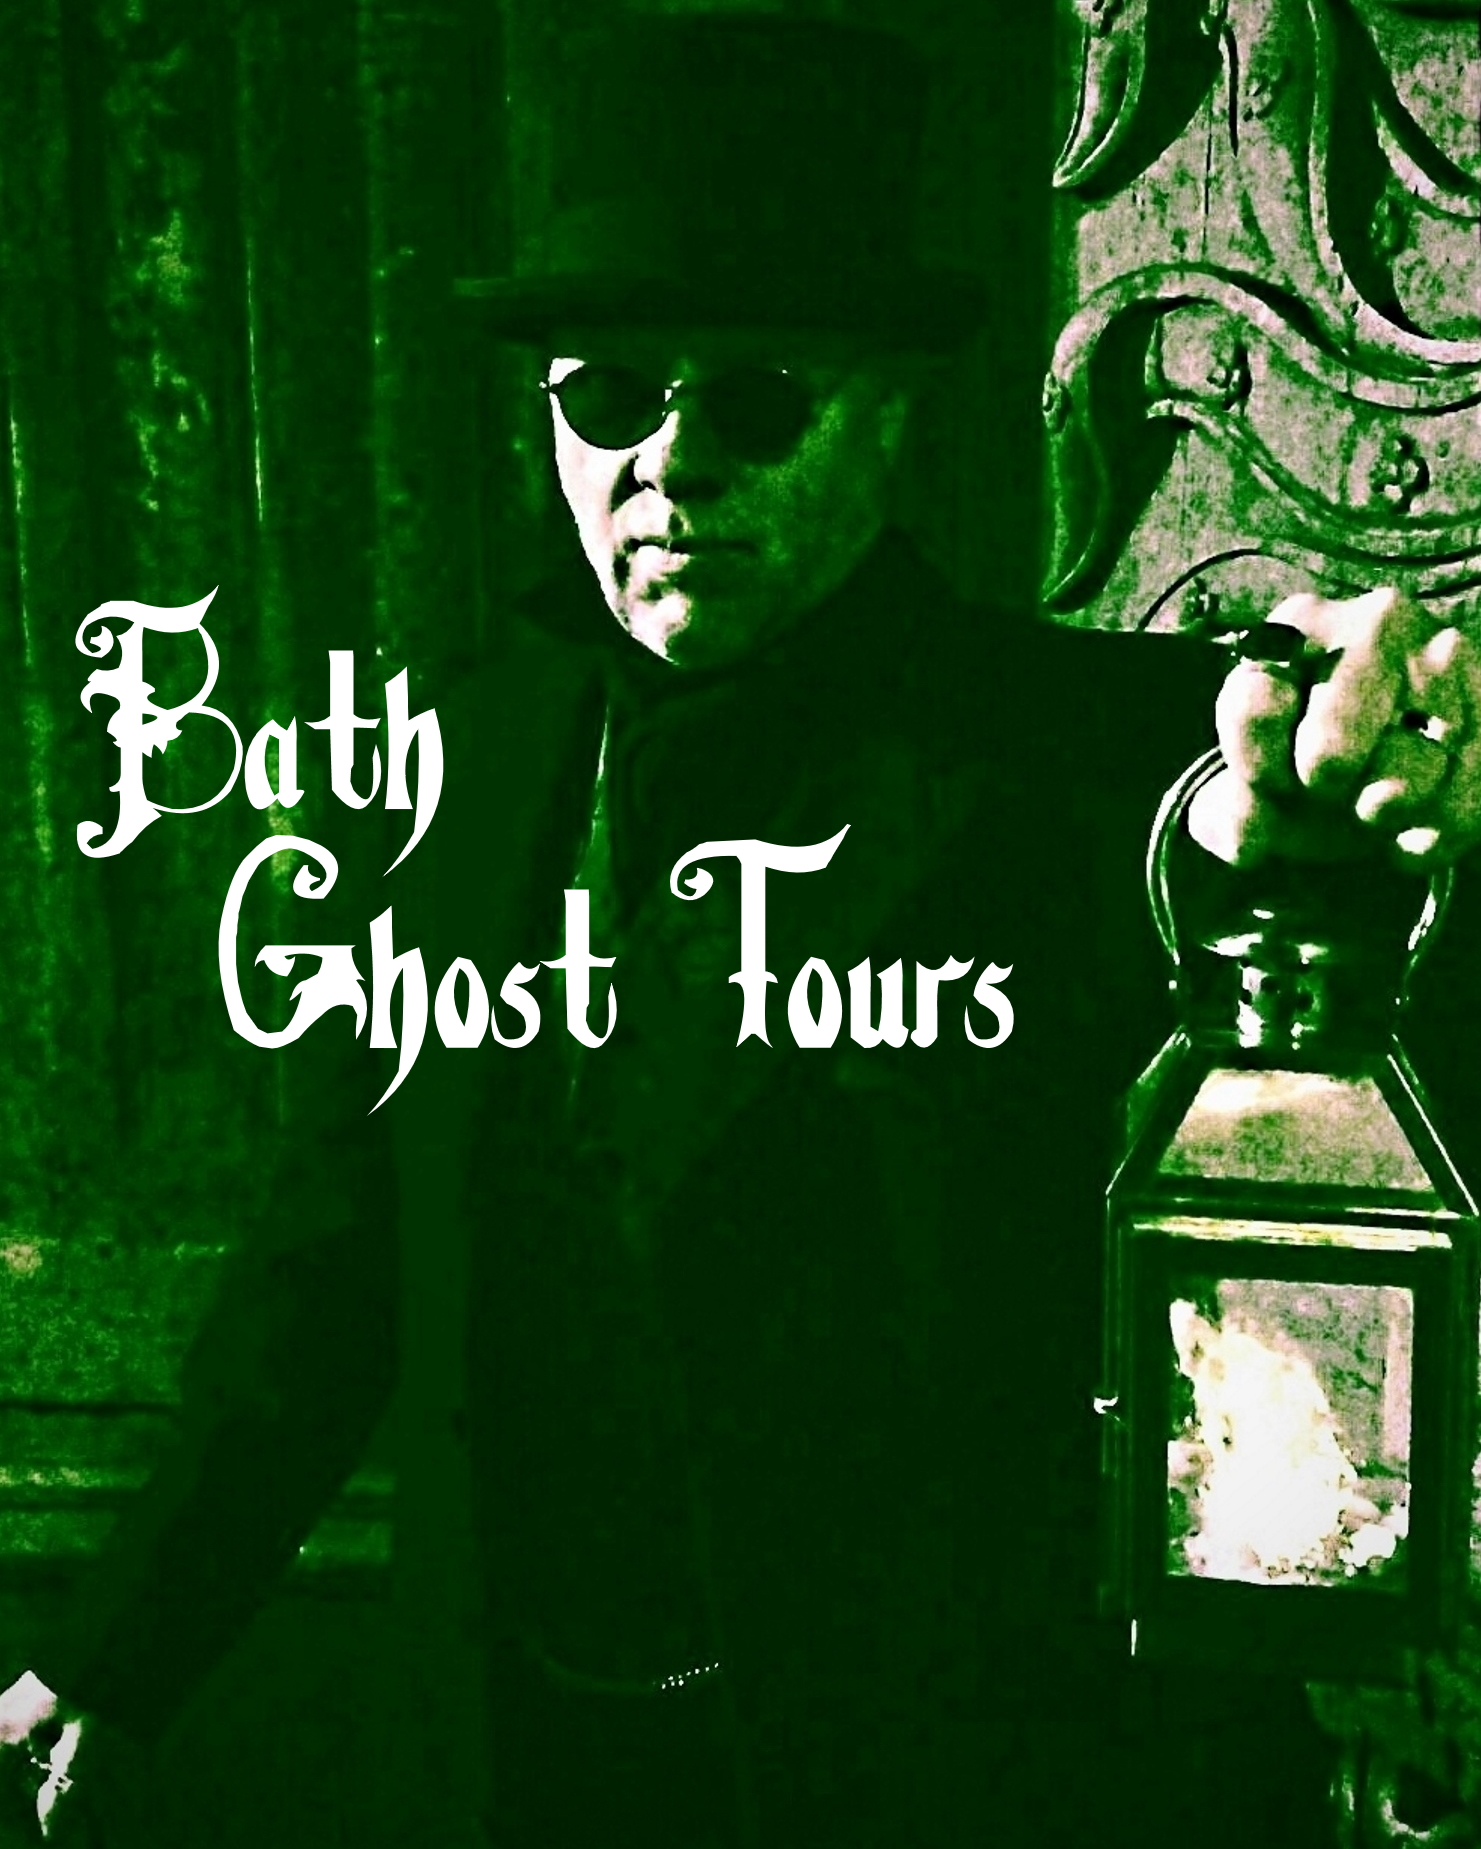 Image of Walking Tours of Bath - Home of Bath Ghost Tours and Bath History and Scandals Tours.